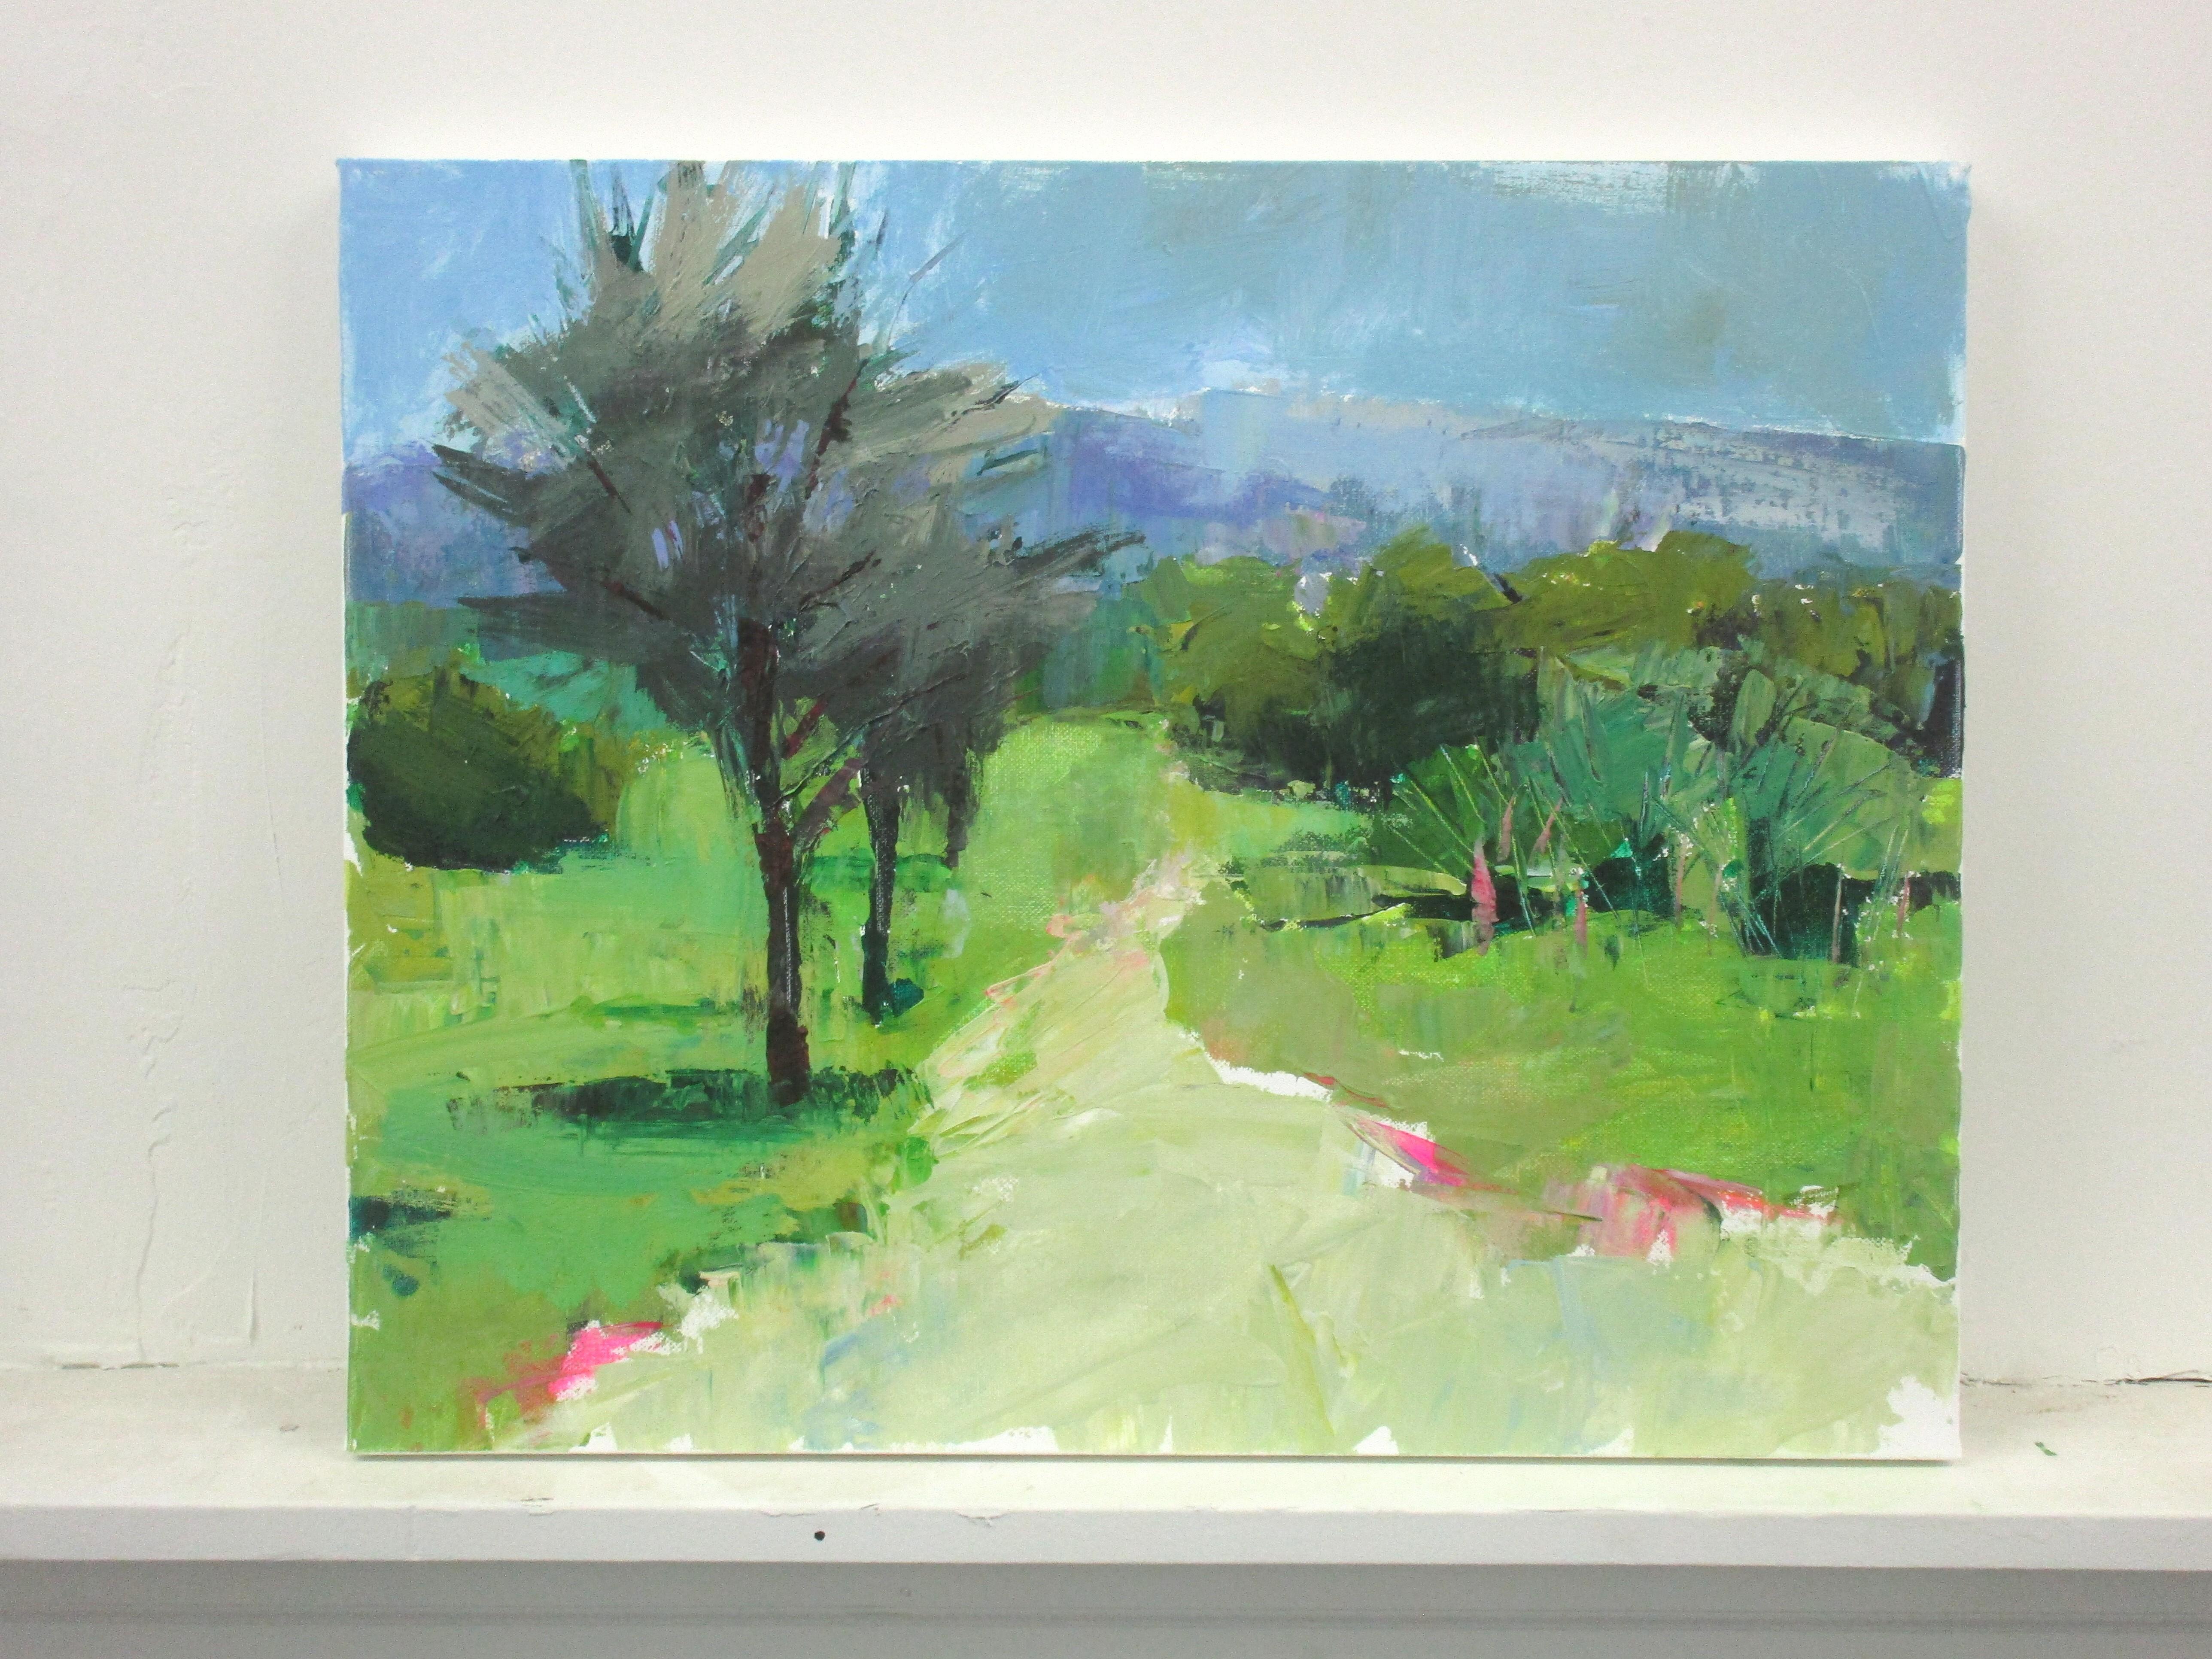 <p>Artist Comments<br />Off the main road near Les Baux, in Provence, France. Bright summer scene. Lively tree forms give way to hazy purple mountains in the distance.</p><br /><p>About the Artist<br />Janet Dyer doesn’t like to spend too much time